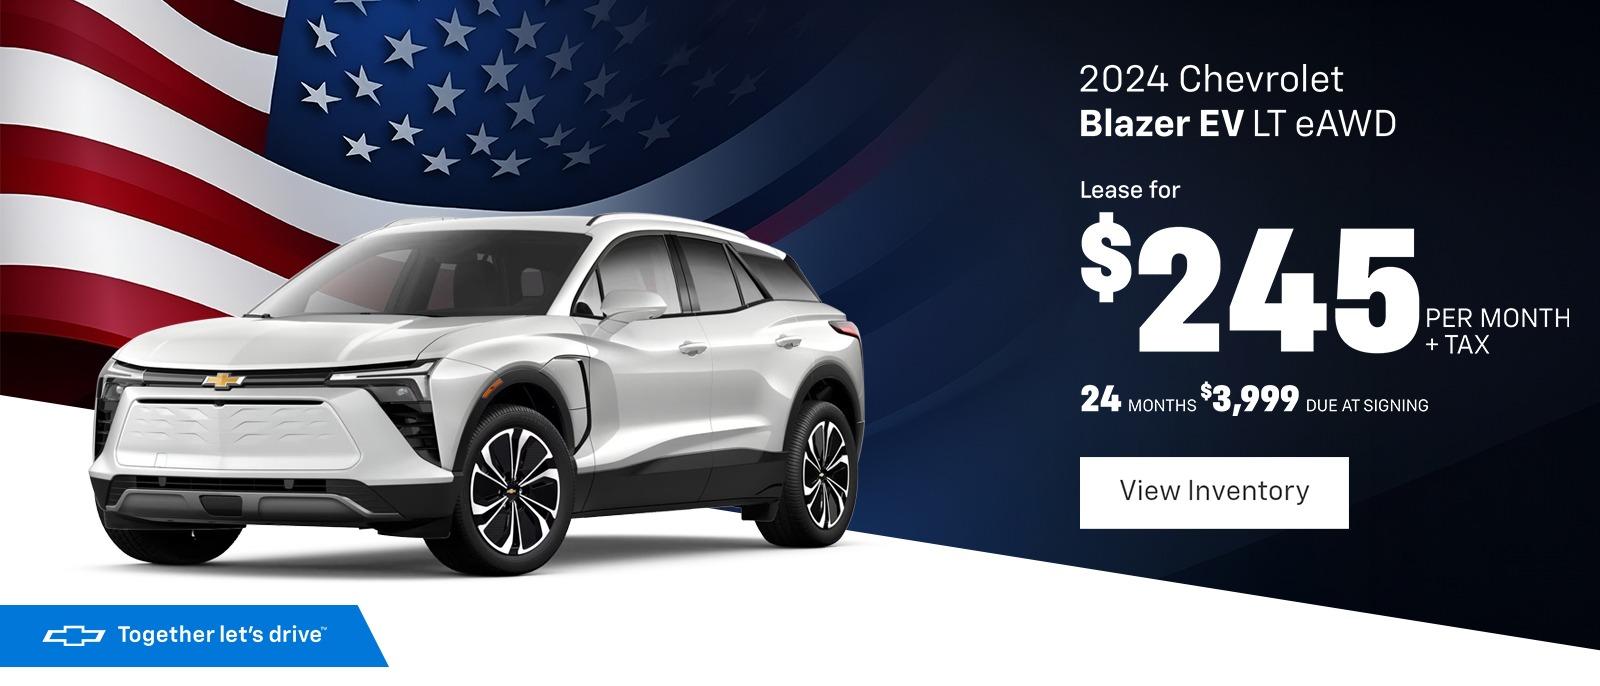 2024 Chevrolet Blazer EV LT eAWD 
Lease for $245 PER MONTH + TAX 24 MONTHS $3,999 DUE AT SIGNING